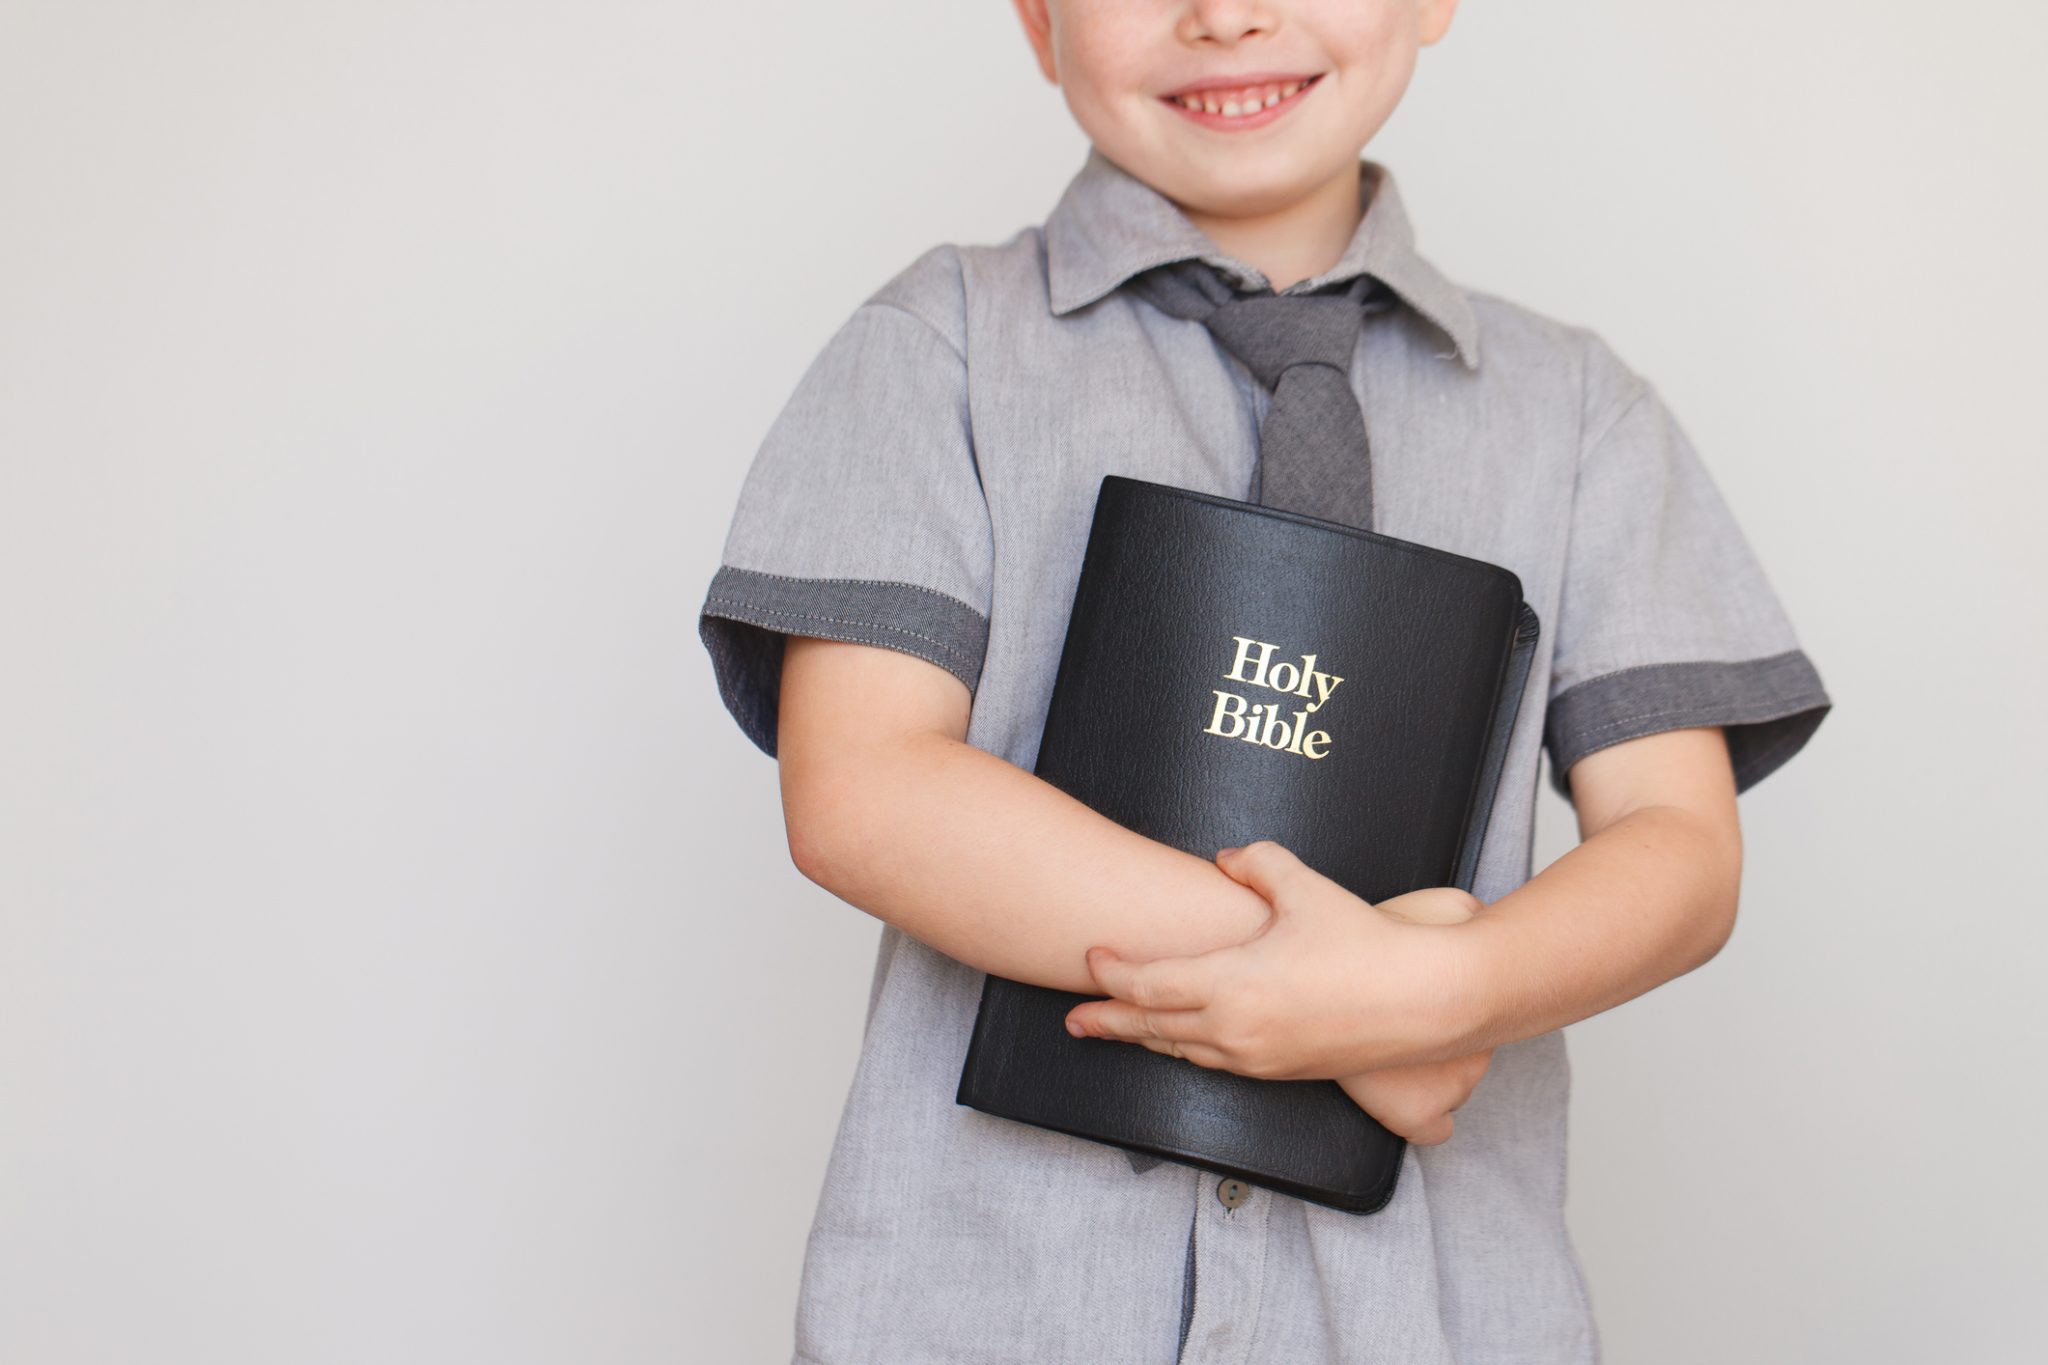 Boy holding Holy Bible book